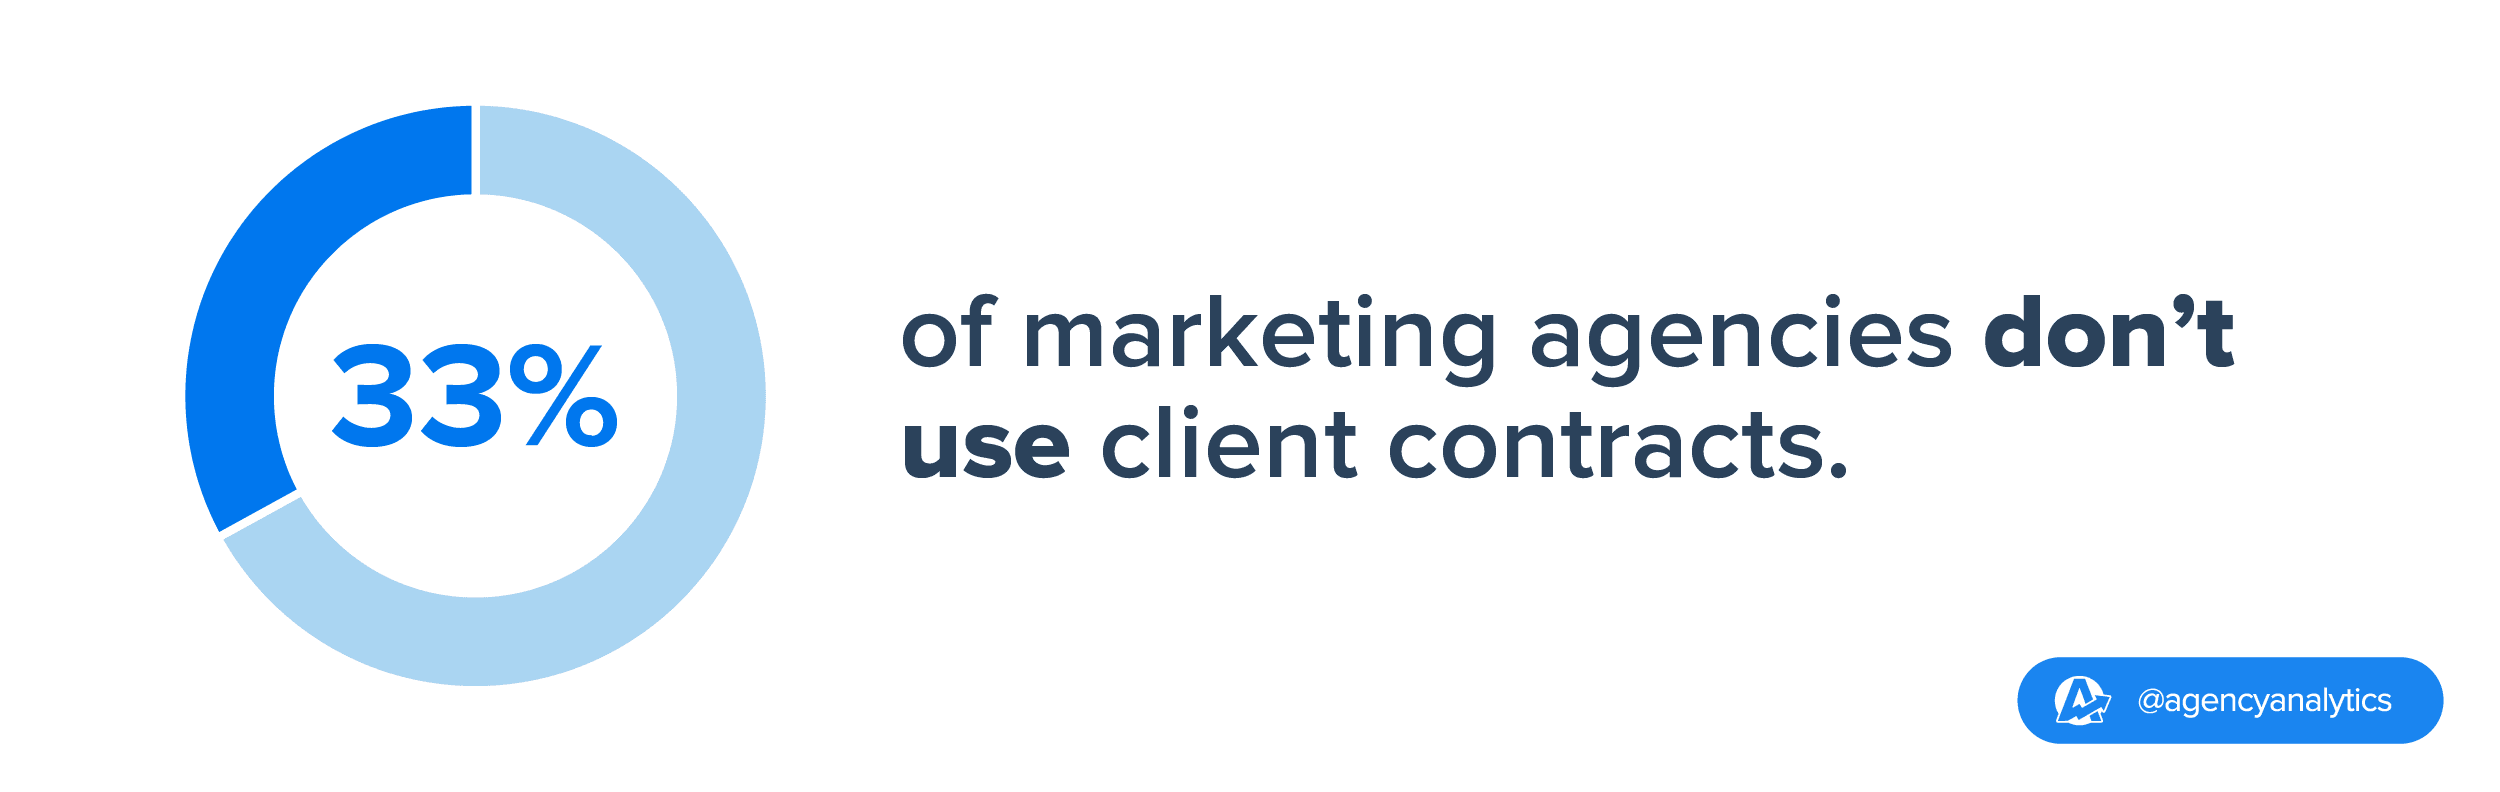 stat showing client contract type used by marketing agencies